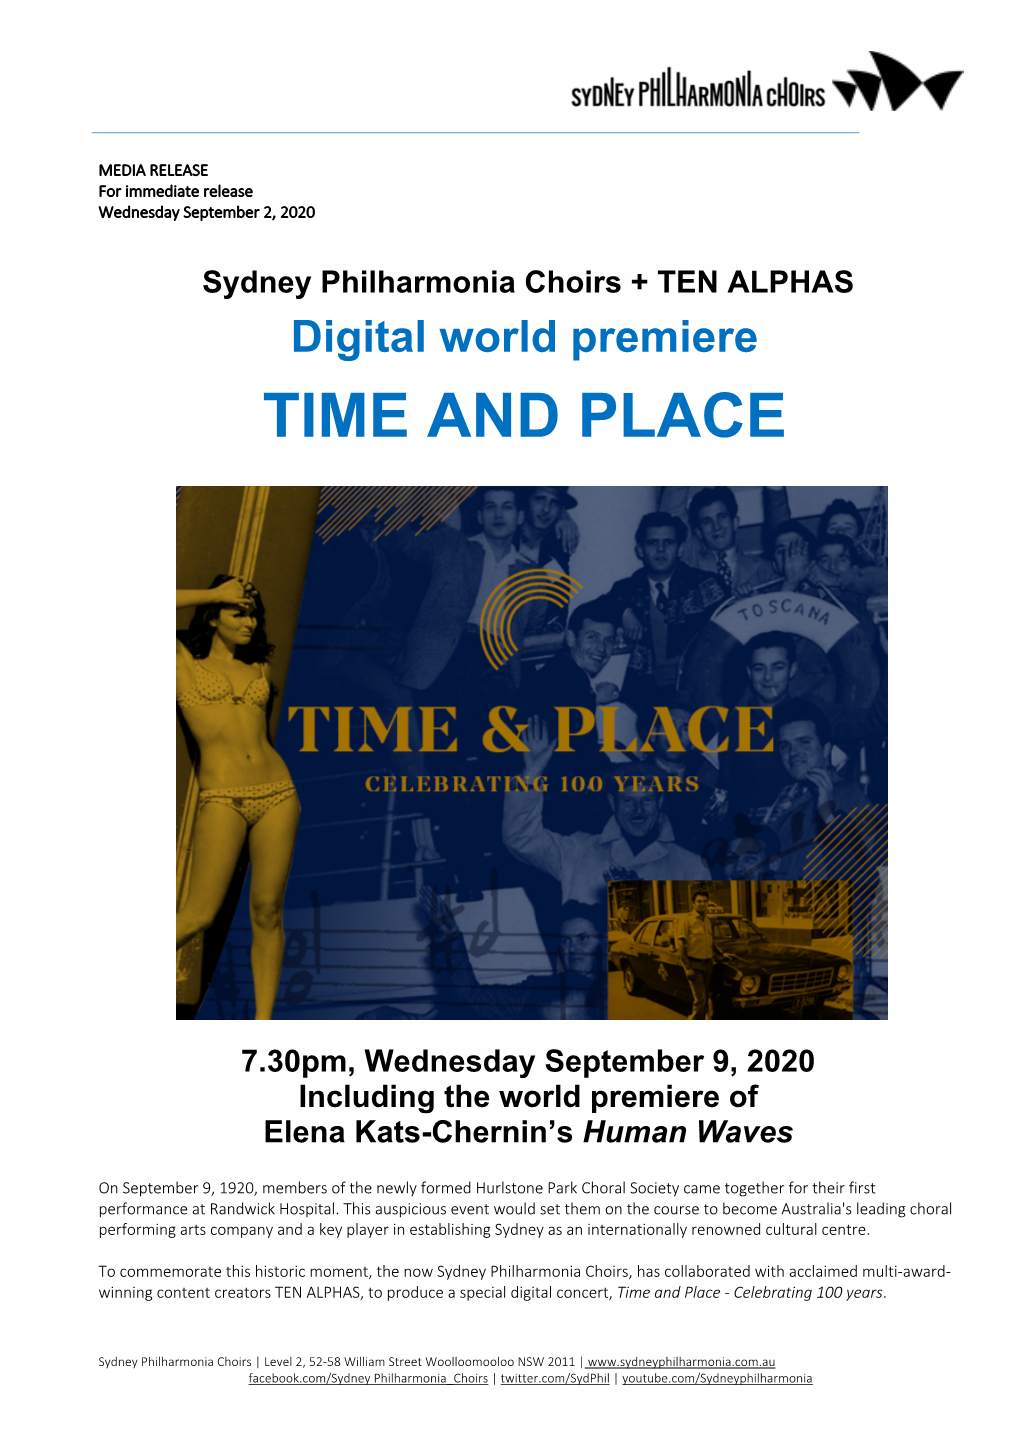 Media Release Sydney Philharmonia Choirs Time and Place Sept2020